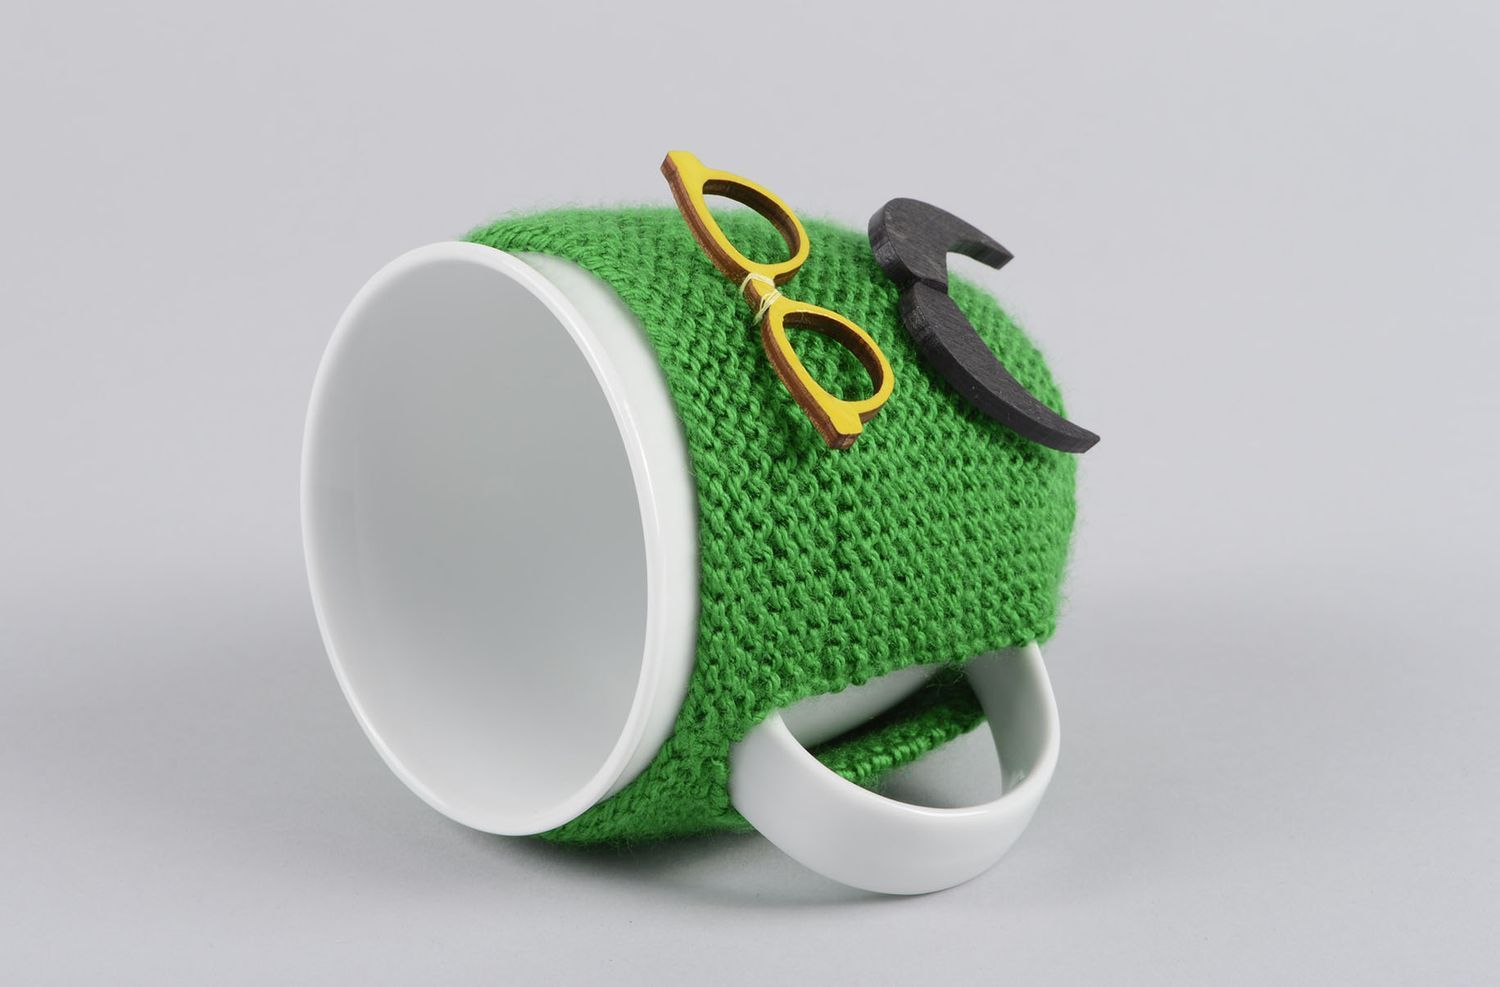 White ceramic porcelain teacup with handle and green man with mustache knitted cover photo 2